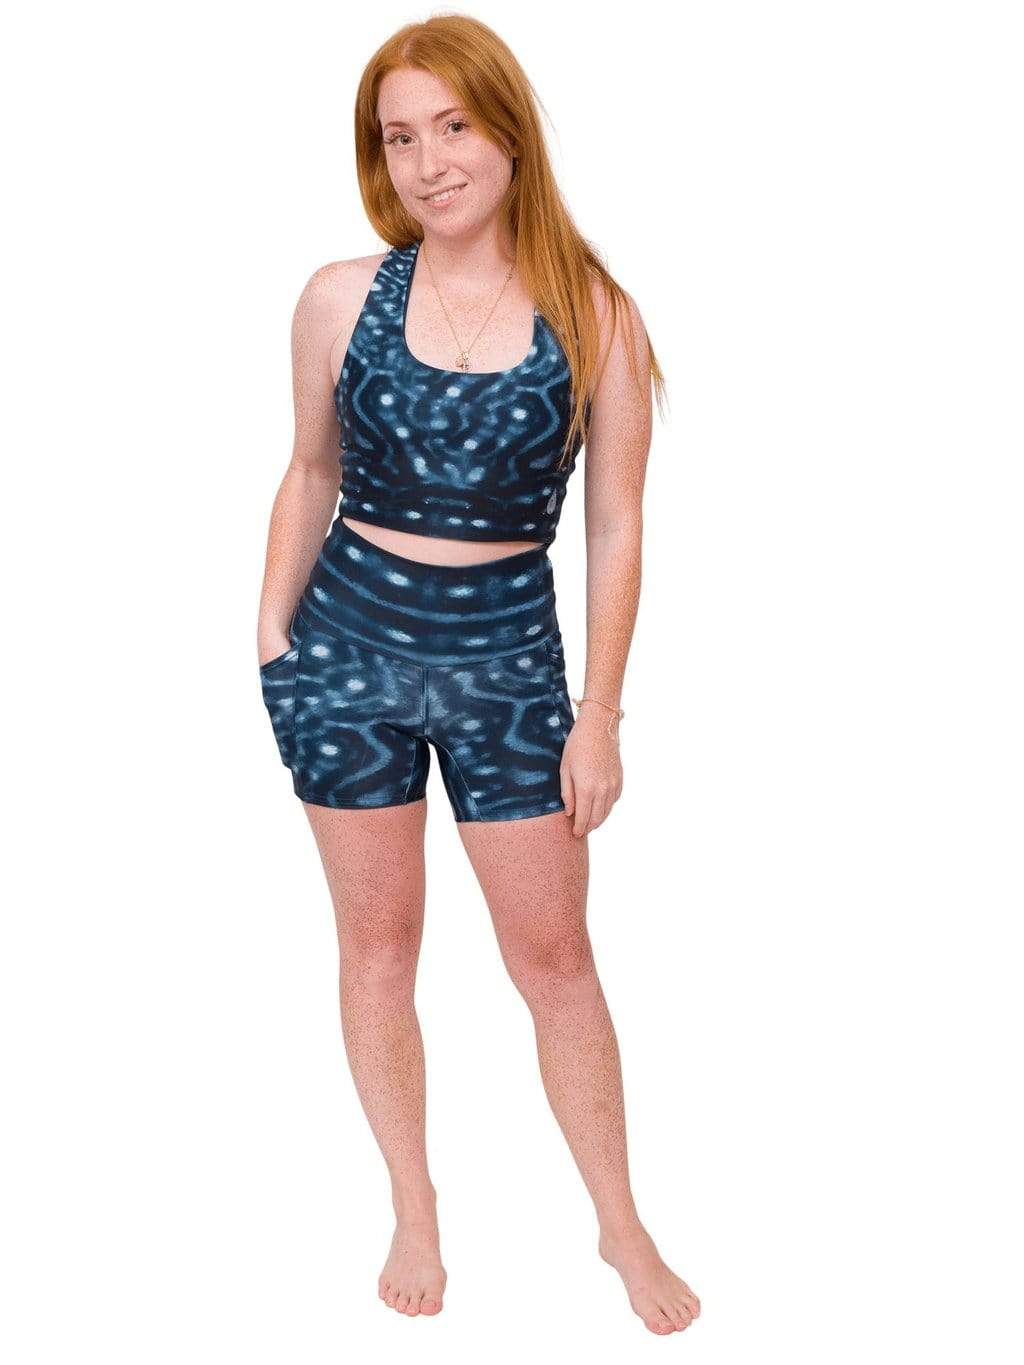 Model: Meggan is working on a masters degree in marine science and has worked as a coral scientist. She is 5&#39;1&quot;, 105 lbs, 32A and is wearing an XS top and XS short.